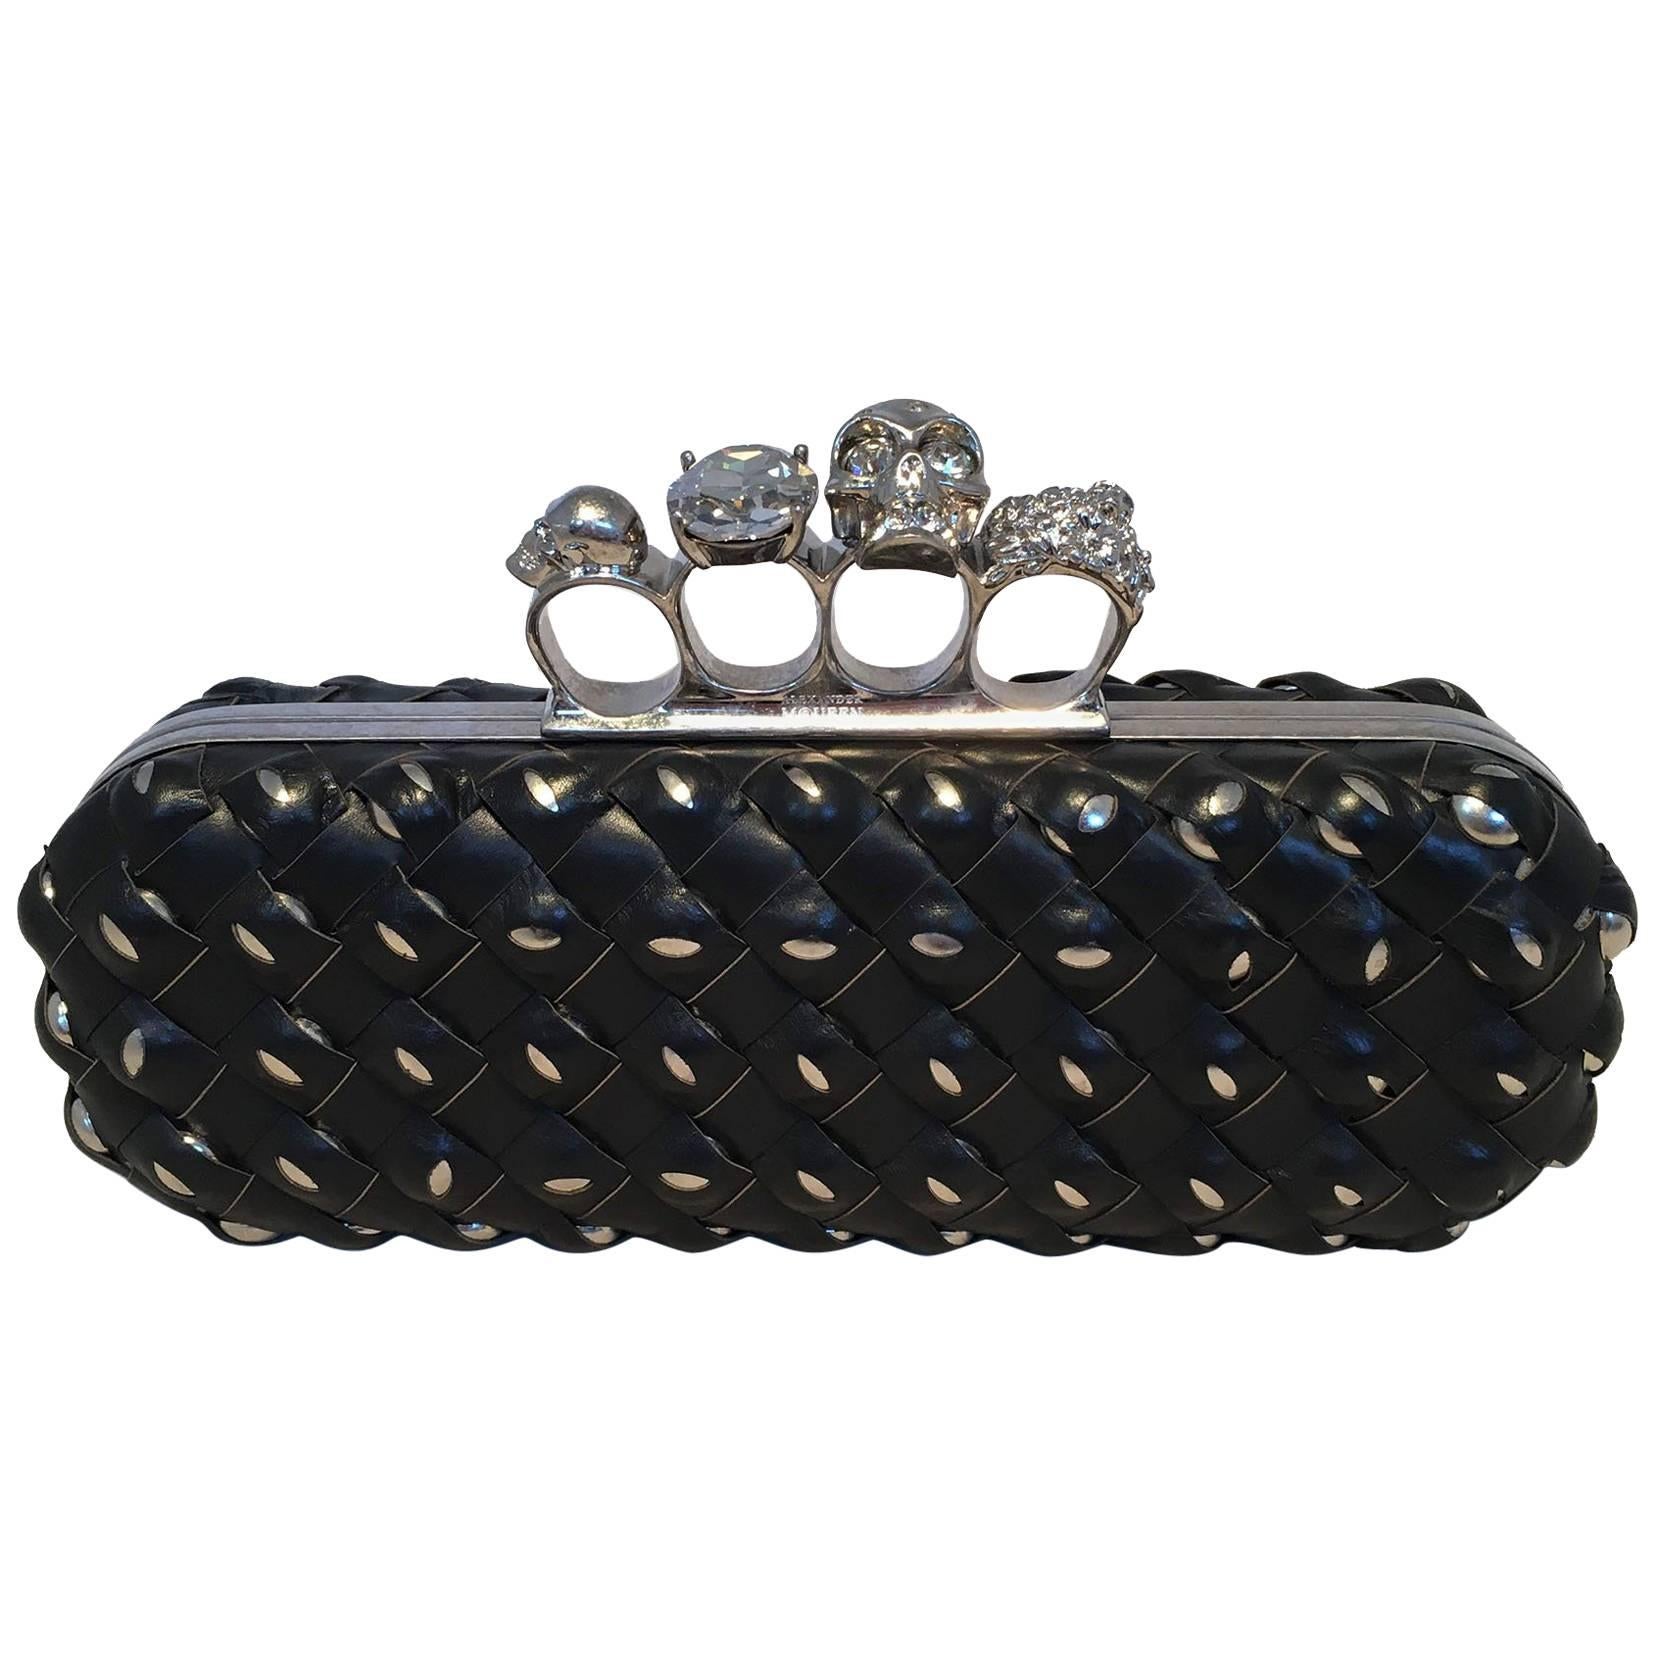 Alexander McQueen Woven Leather Studded Embellished Knuckle Clutch